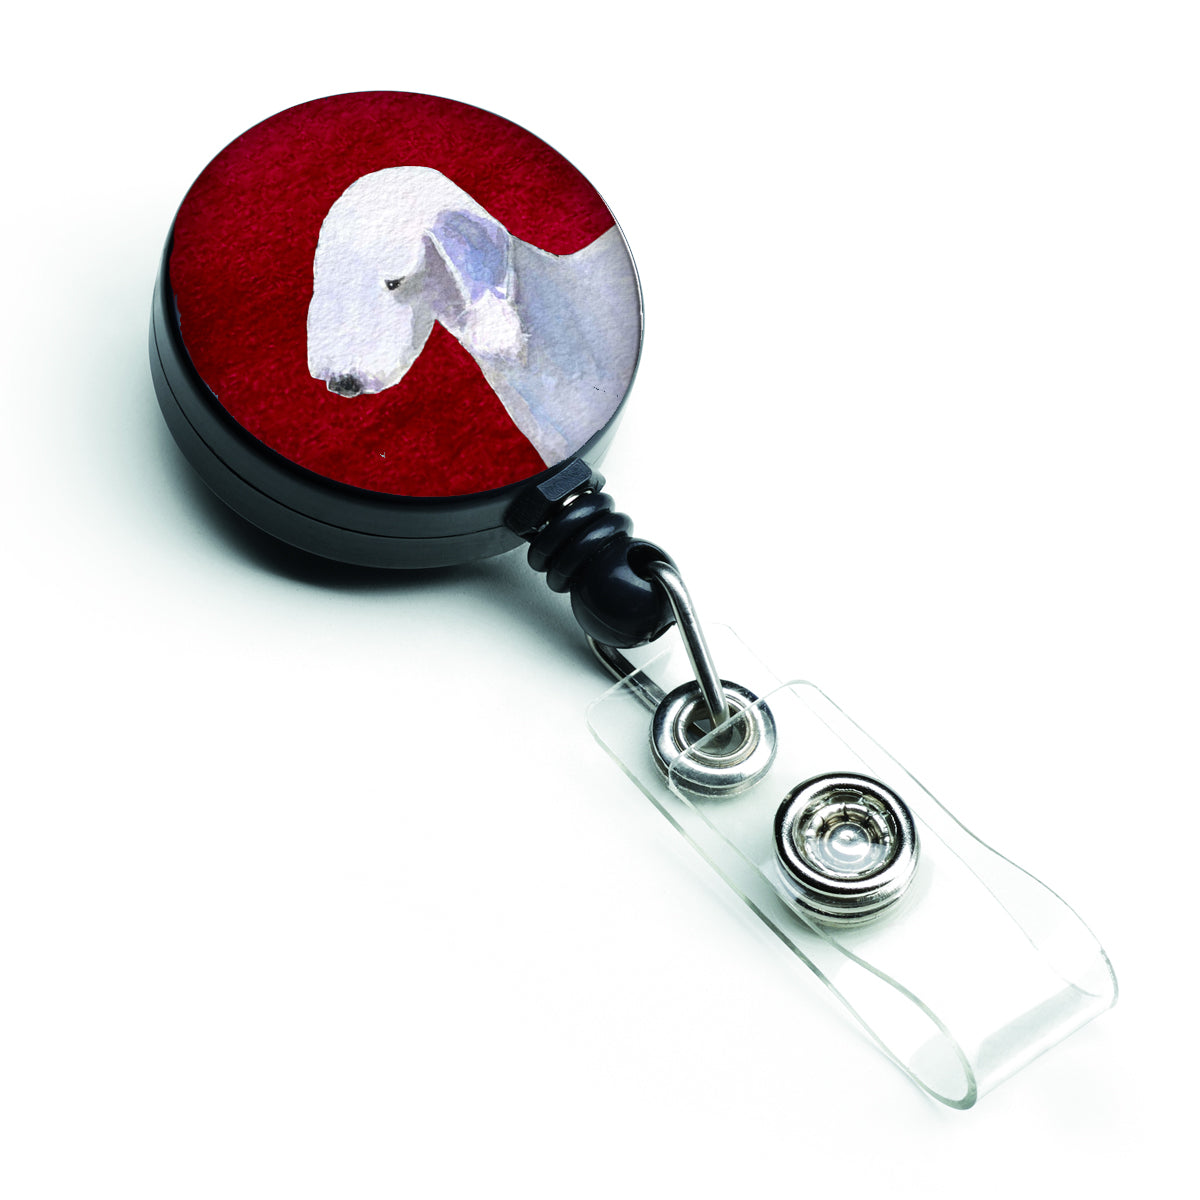 Bedlington Terrier Retractable Badge Reel or ID Holder with Clip.